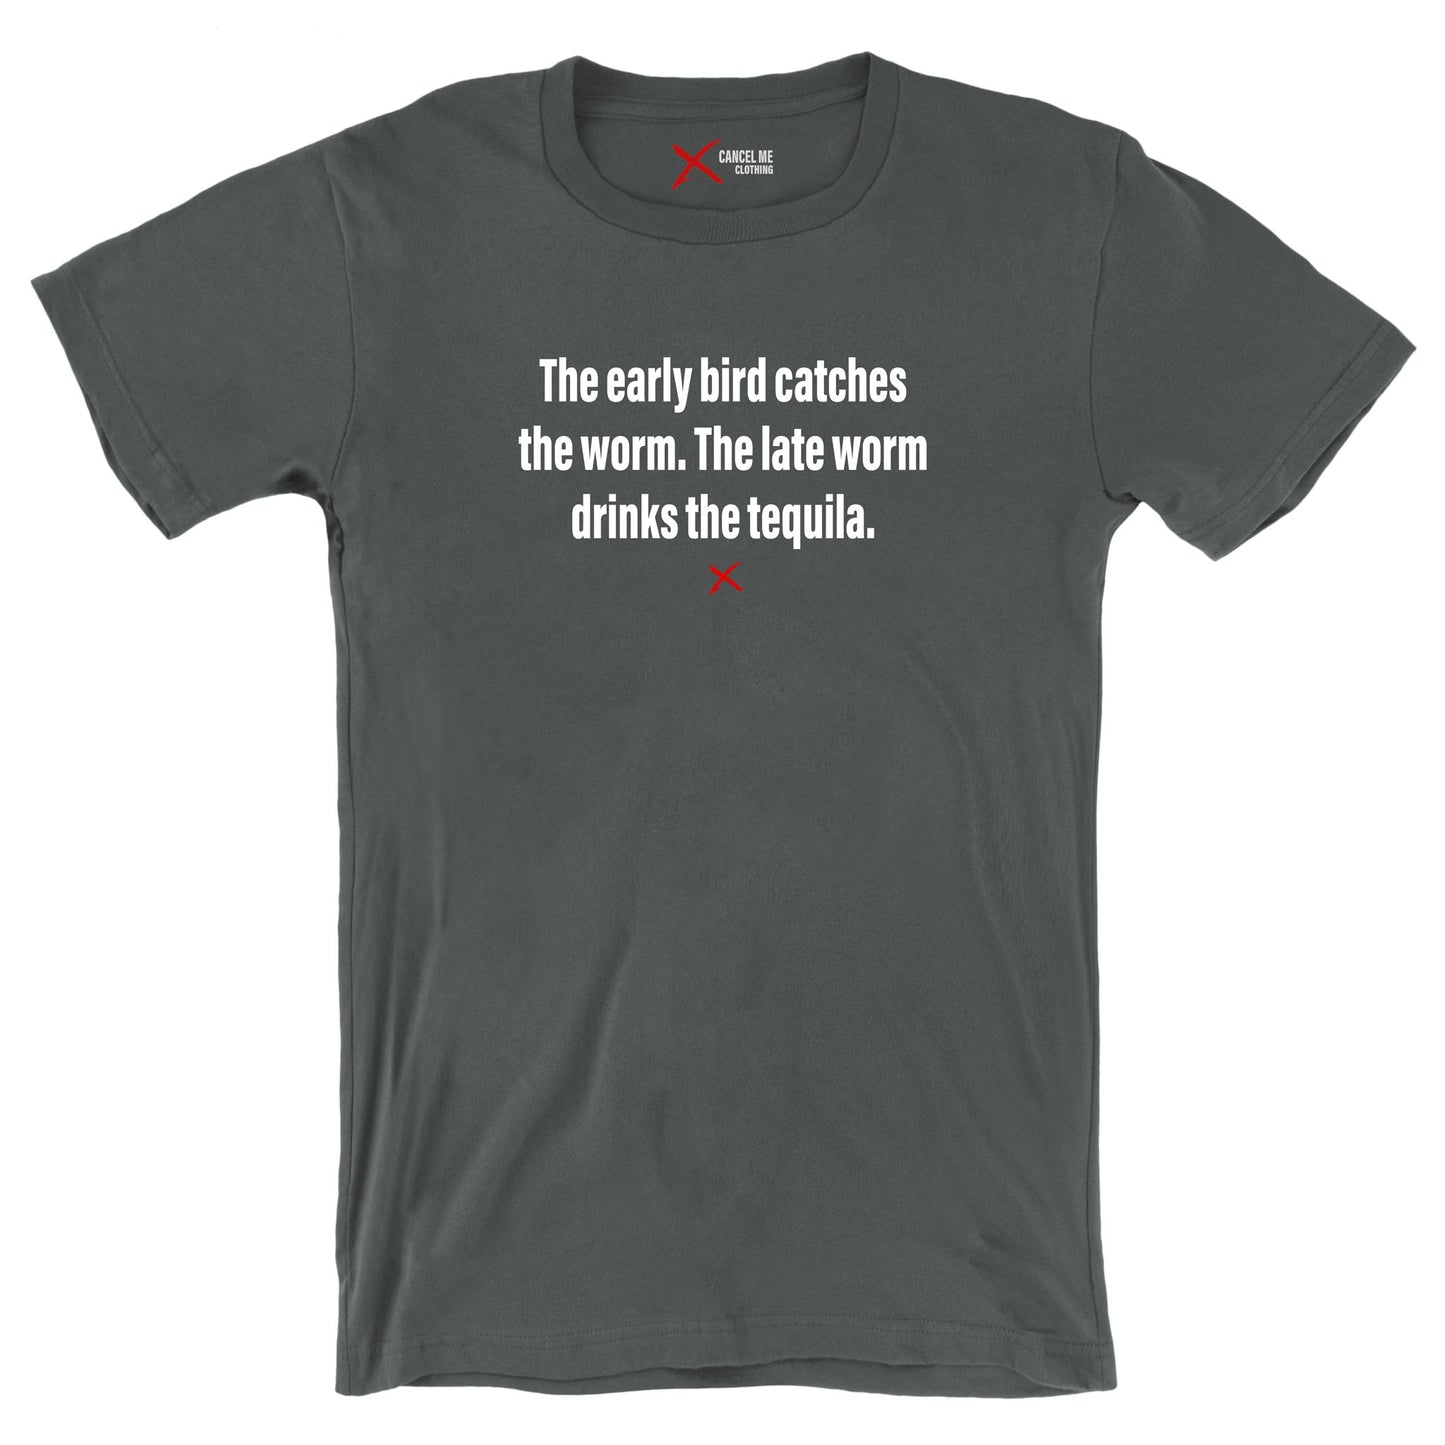 The early bird catches the worm. The late worm drinks the tequila. - Shirt